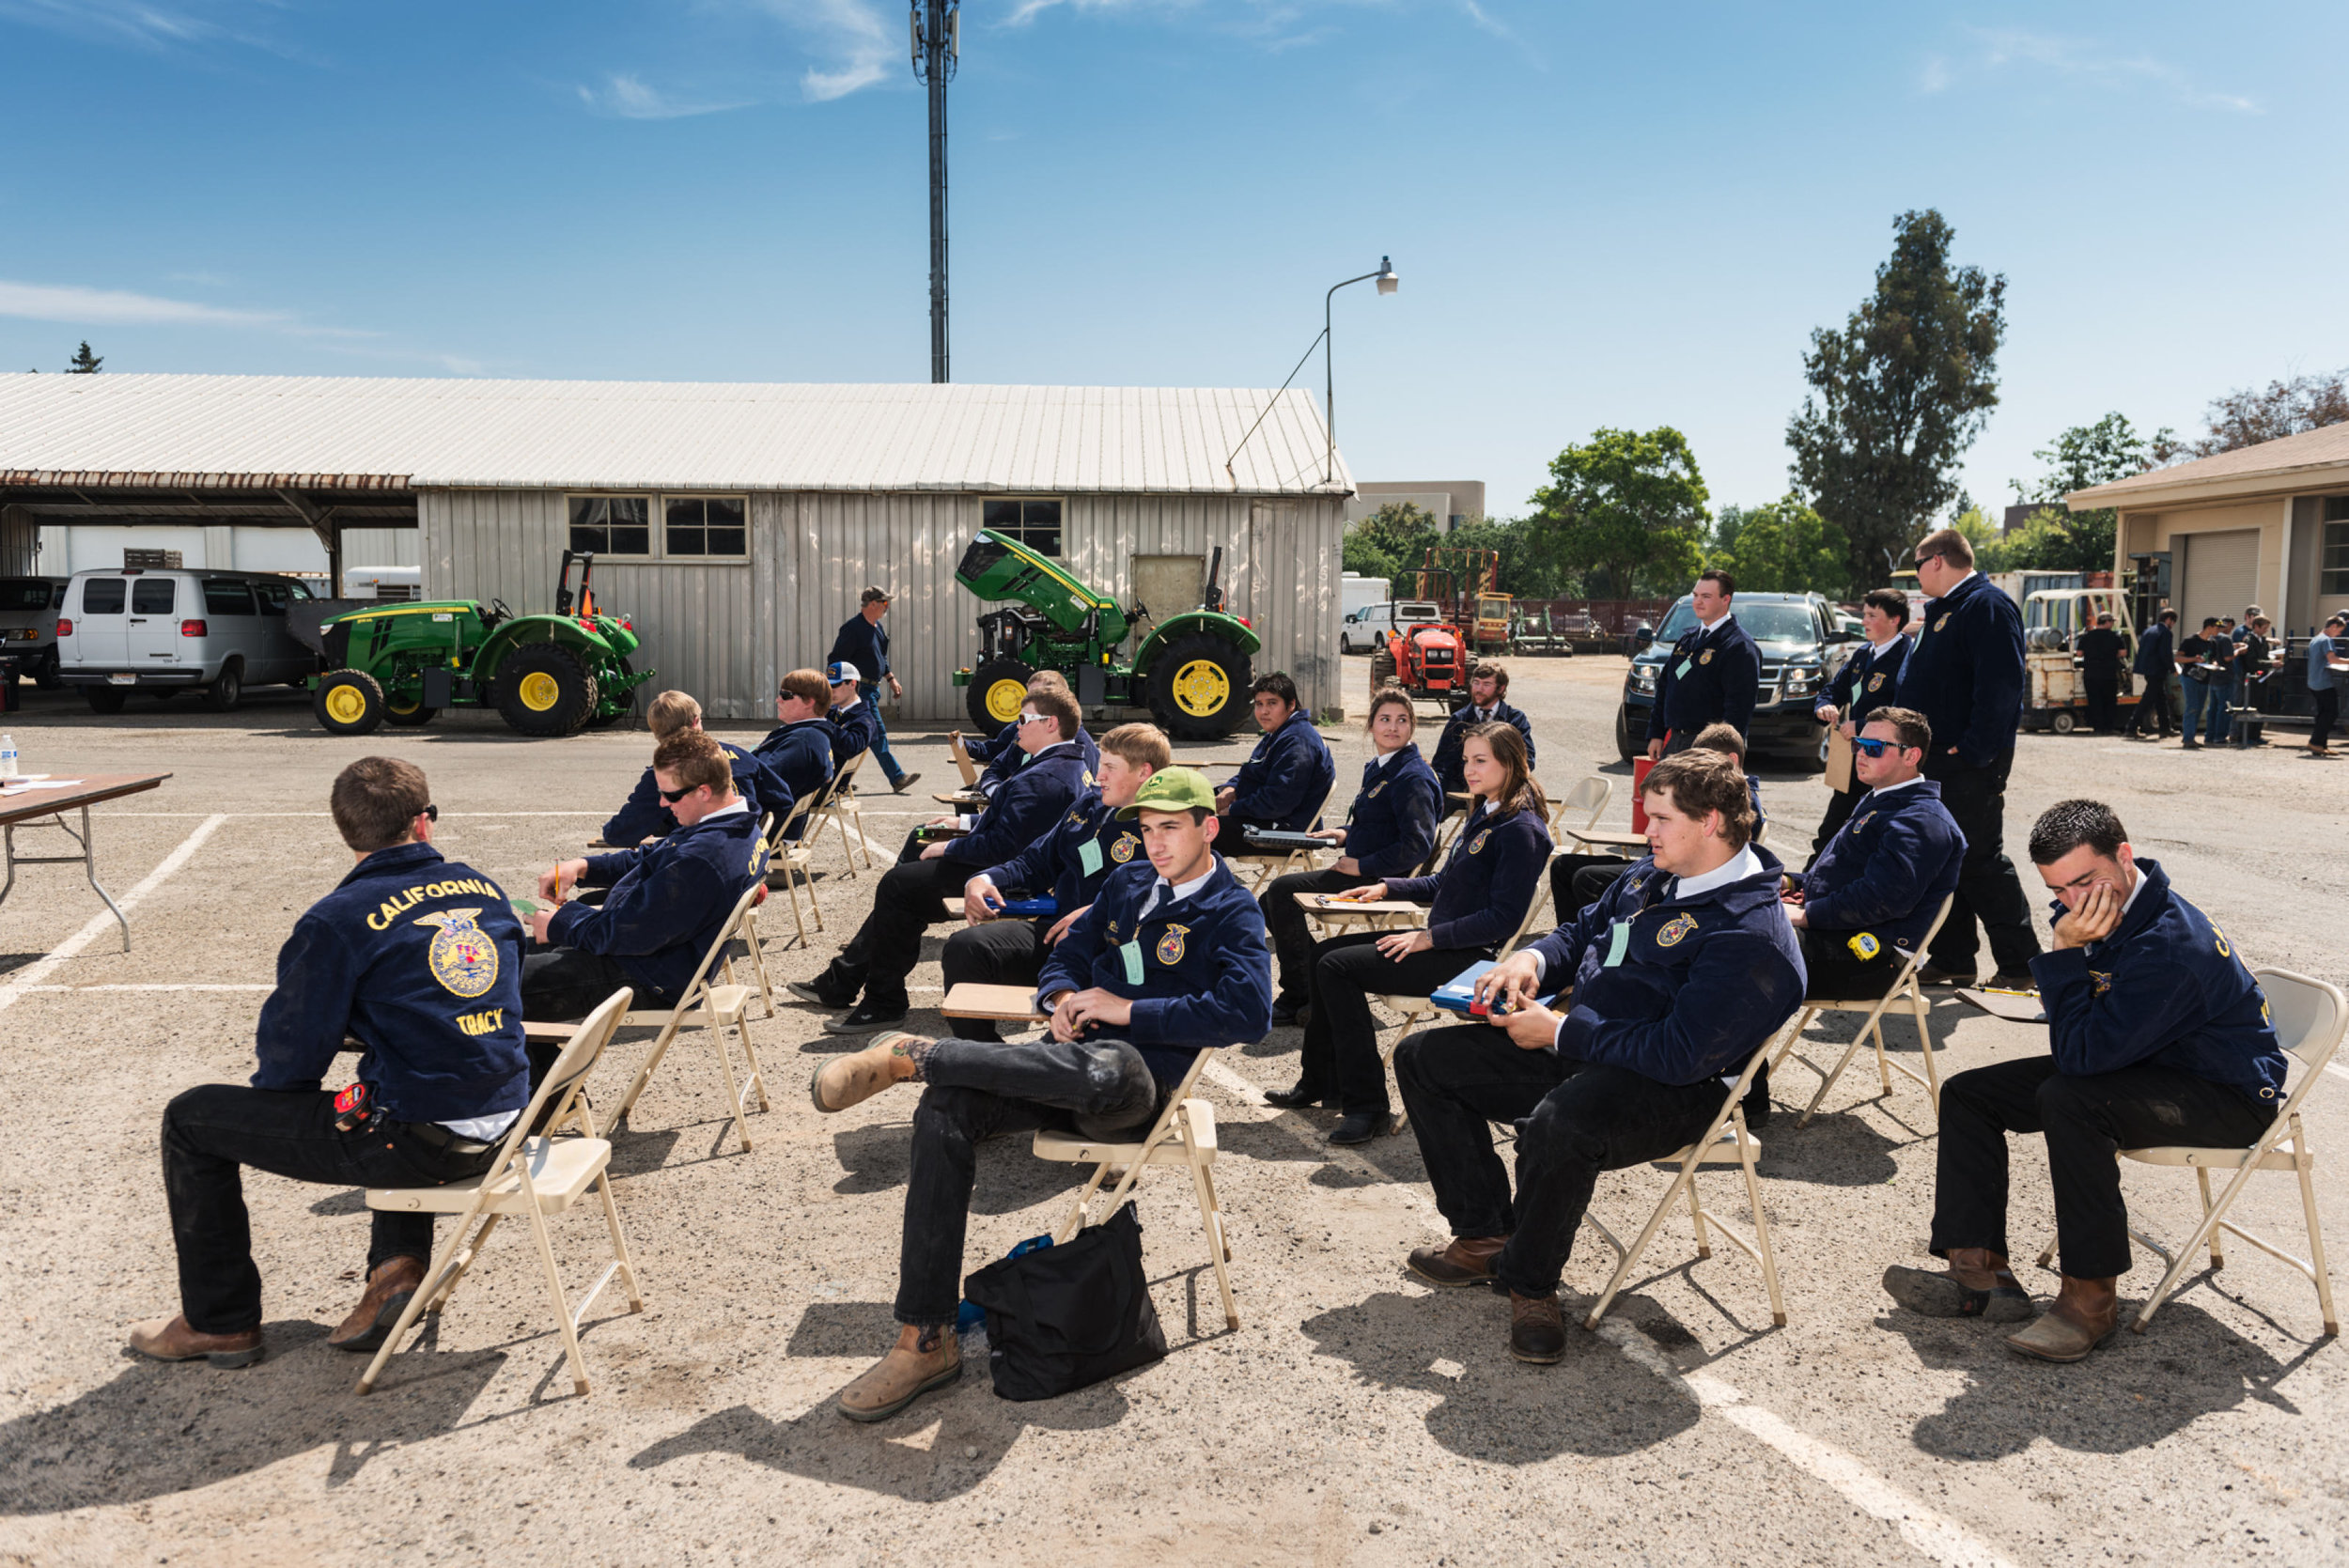   The California Future Farmers of America is trying to bring in more Latino students into the program, with hopes developing an interest in careers in agriculture, as half of all farm laborers and operators in the U.S. are Hispanic. I photographed t